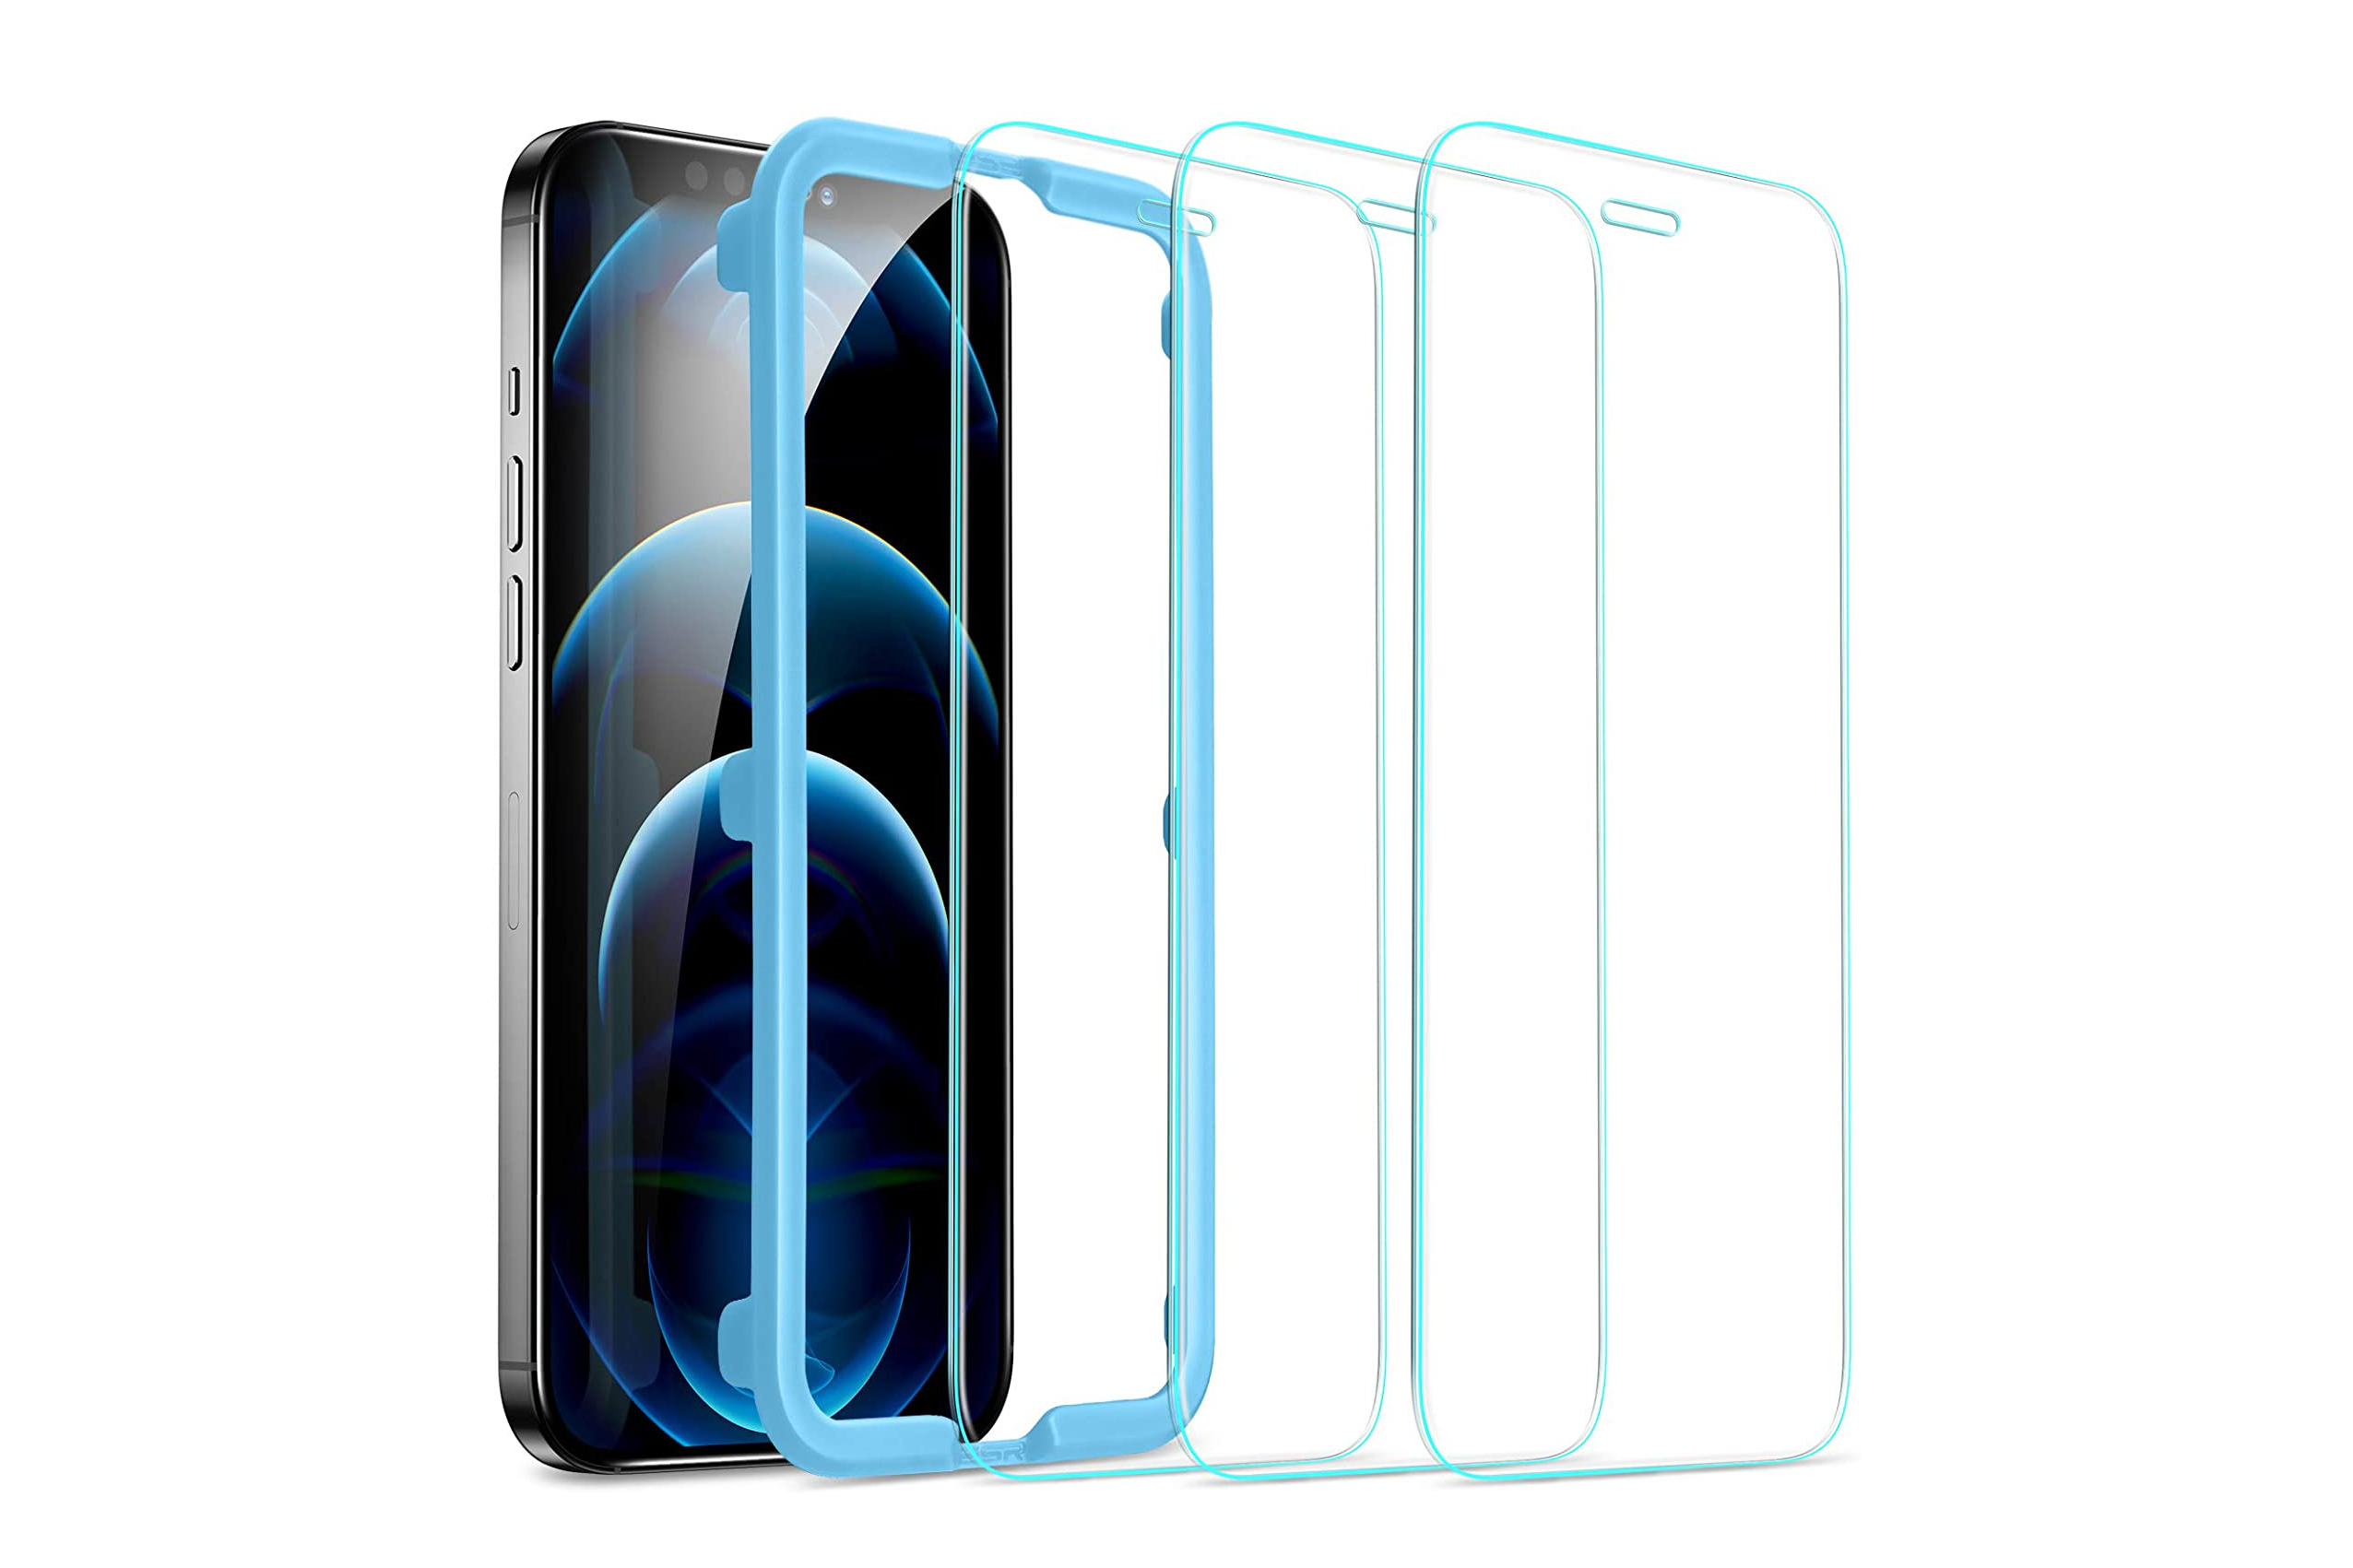 Premium Tempered Glass 9H Hardness 2.5D with Easy Installation Case Bubble Free Scratch Resistant-Case Friendly 3 Pack Screen Protector Compatible for iPhone 13 Pro Max 6.7 inch 